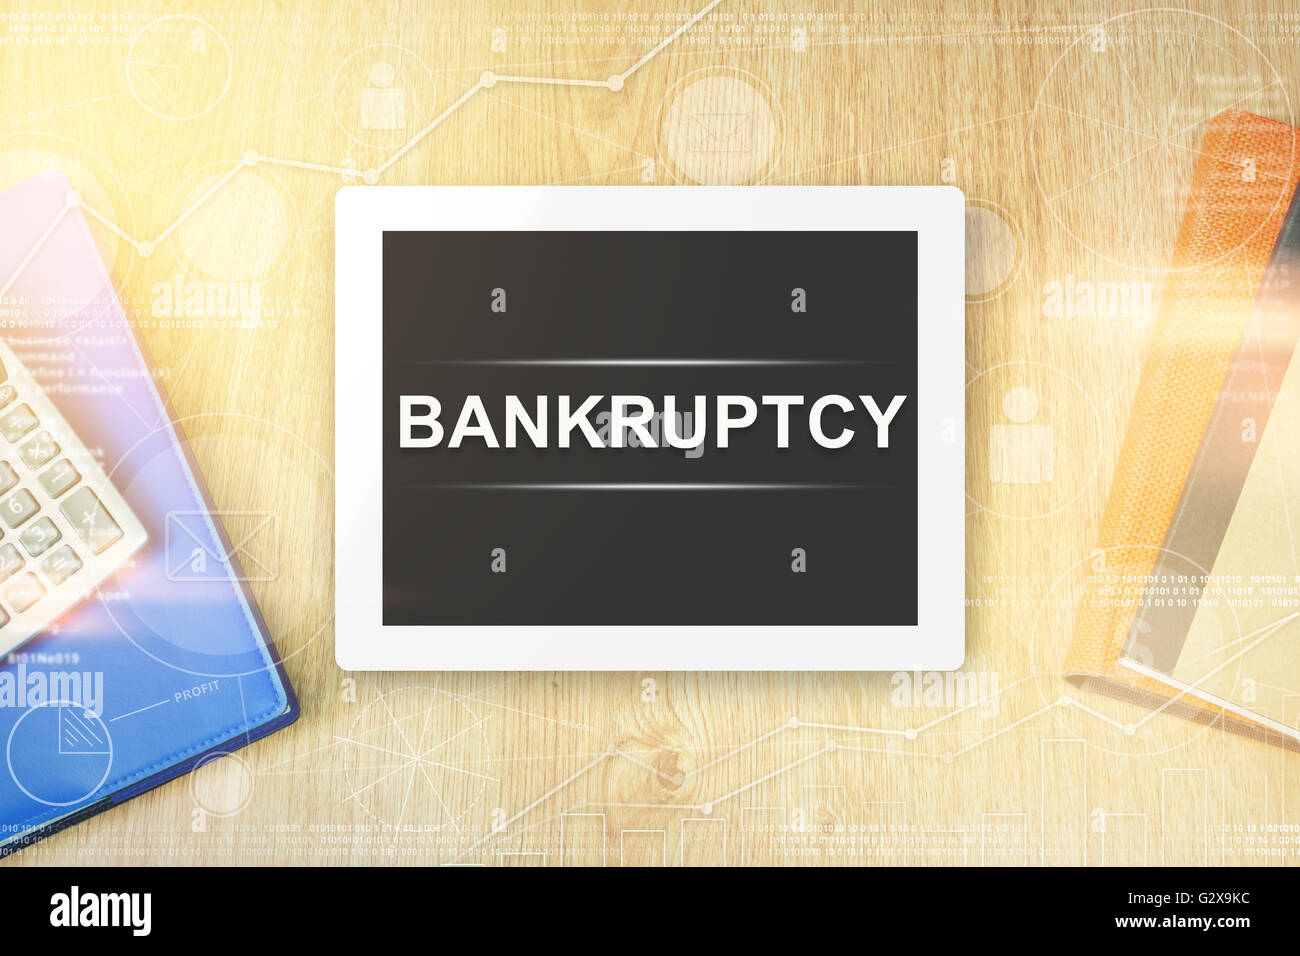 bankruptcy word on tablet with soft light vintage effect Stock Photo